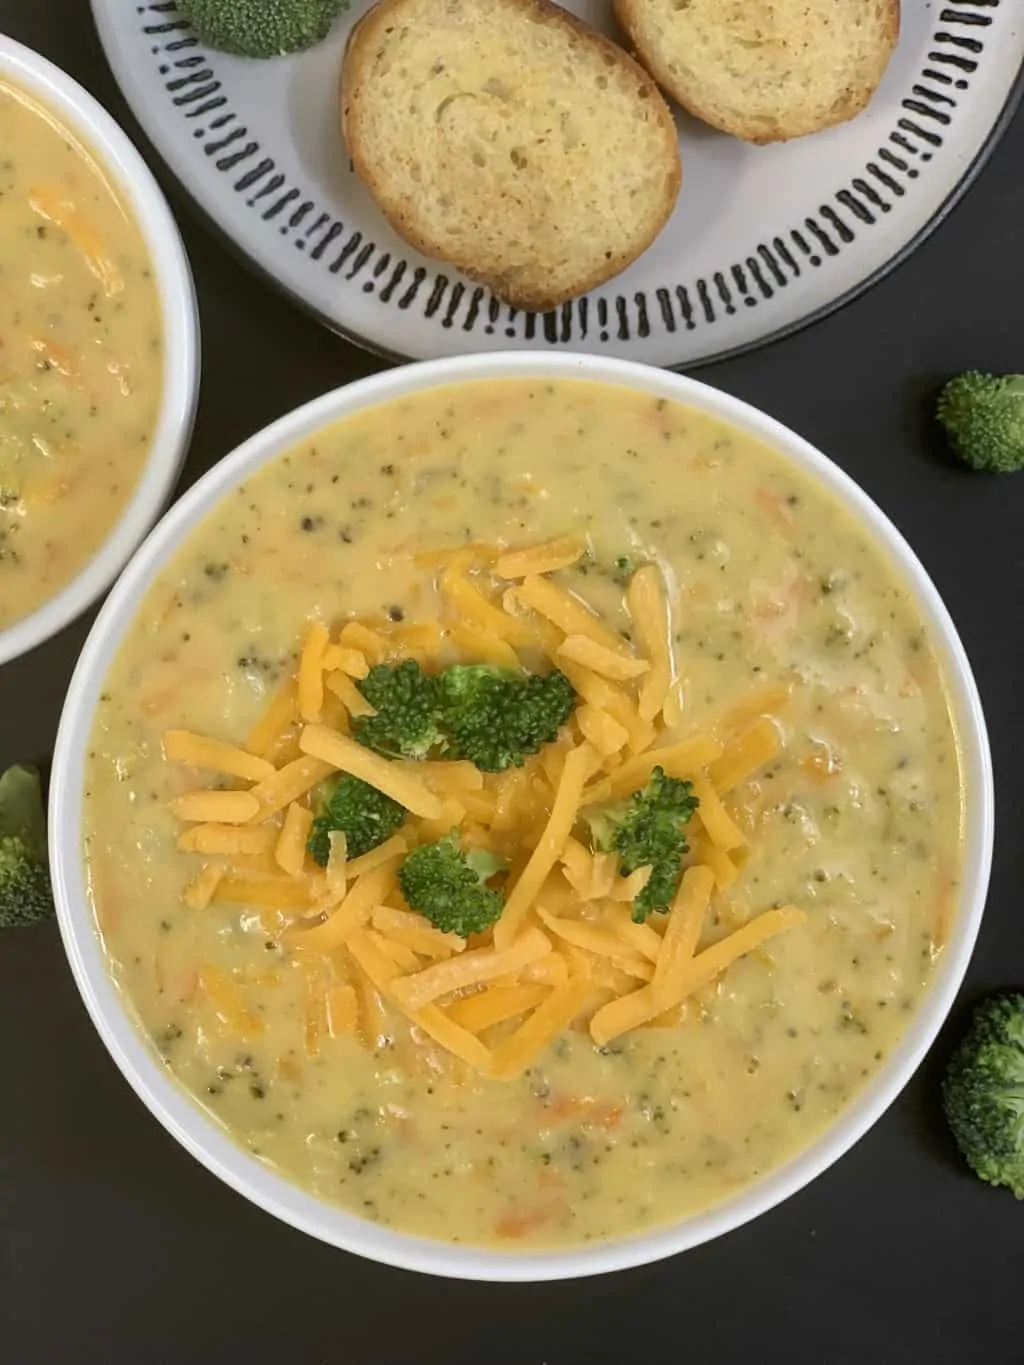 broccoli cheddar soup served in a bowl garnished with sharp cheddar cheese and cooked broccoli with garlic bread on the side